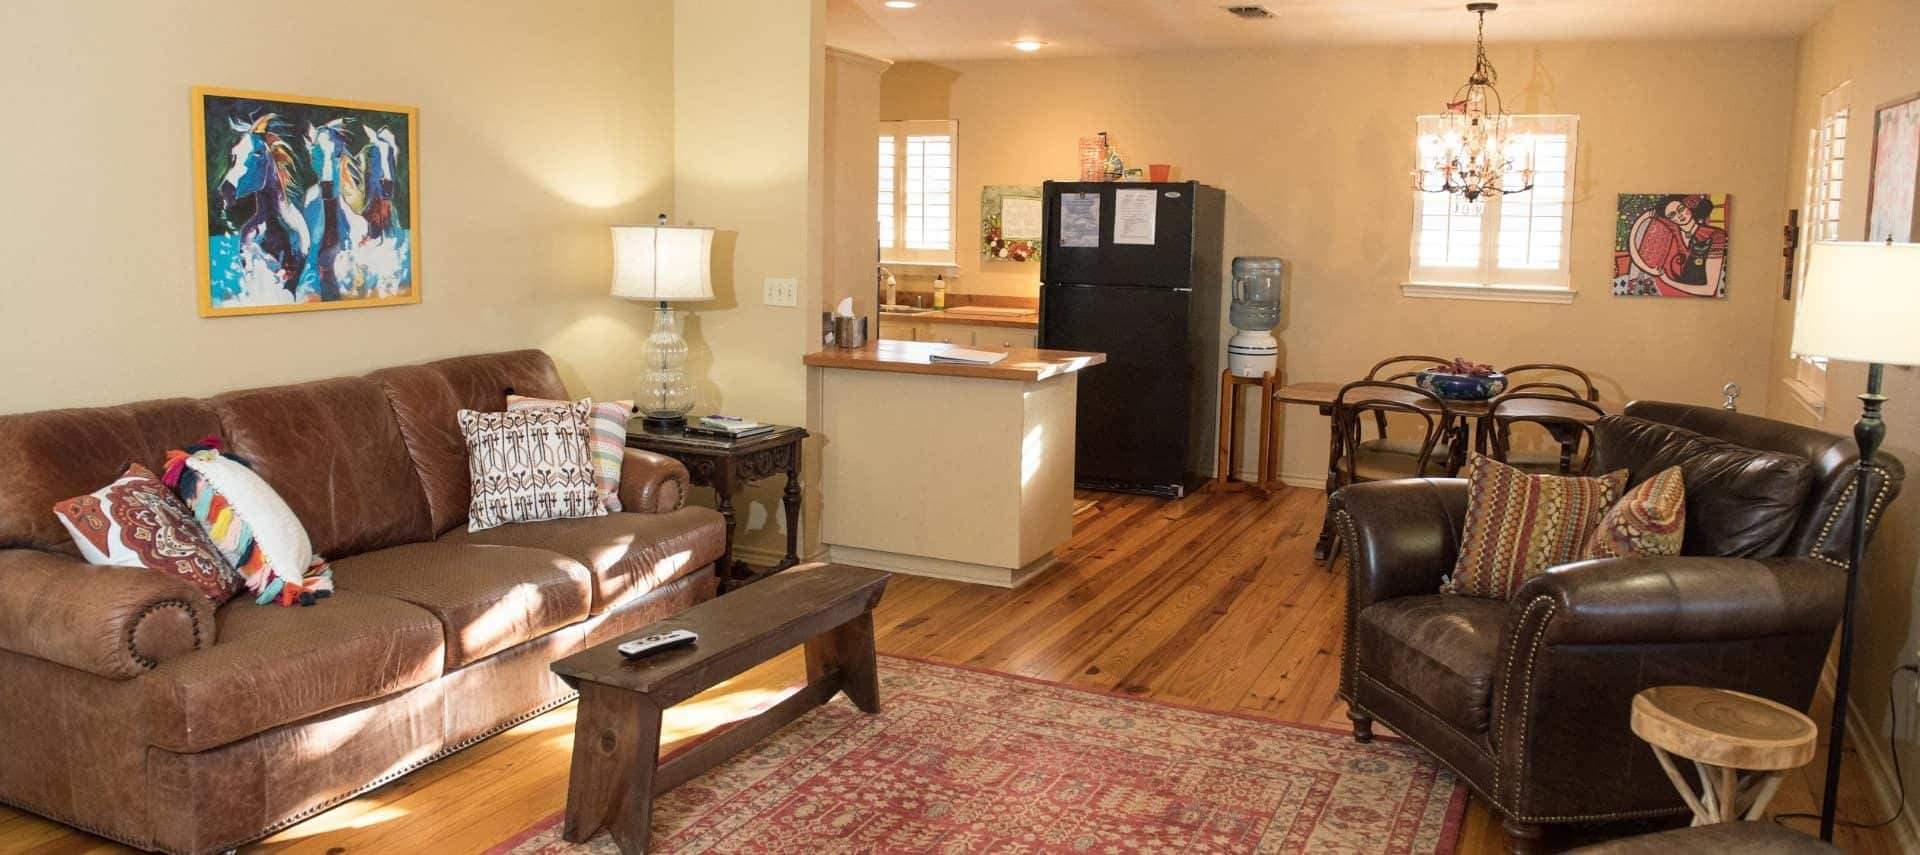 Large room with yellow walls, hardwood flooring, brown leather couch and chair, dining area, and kitchen